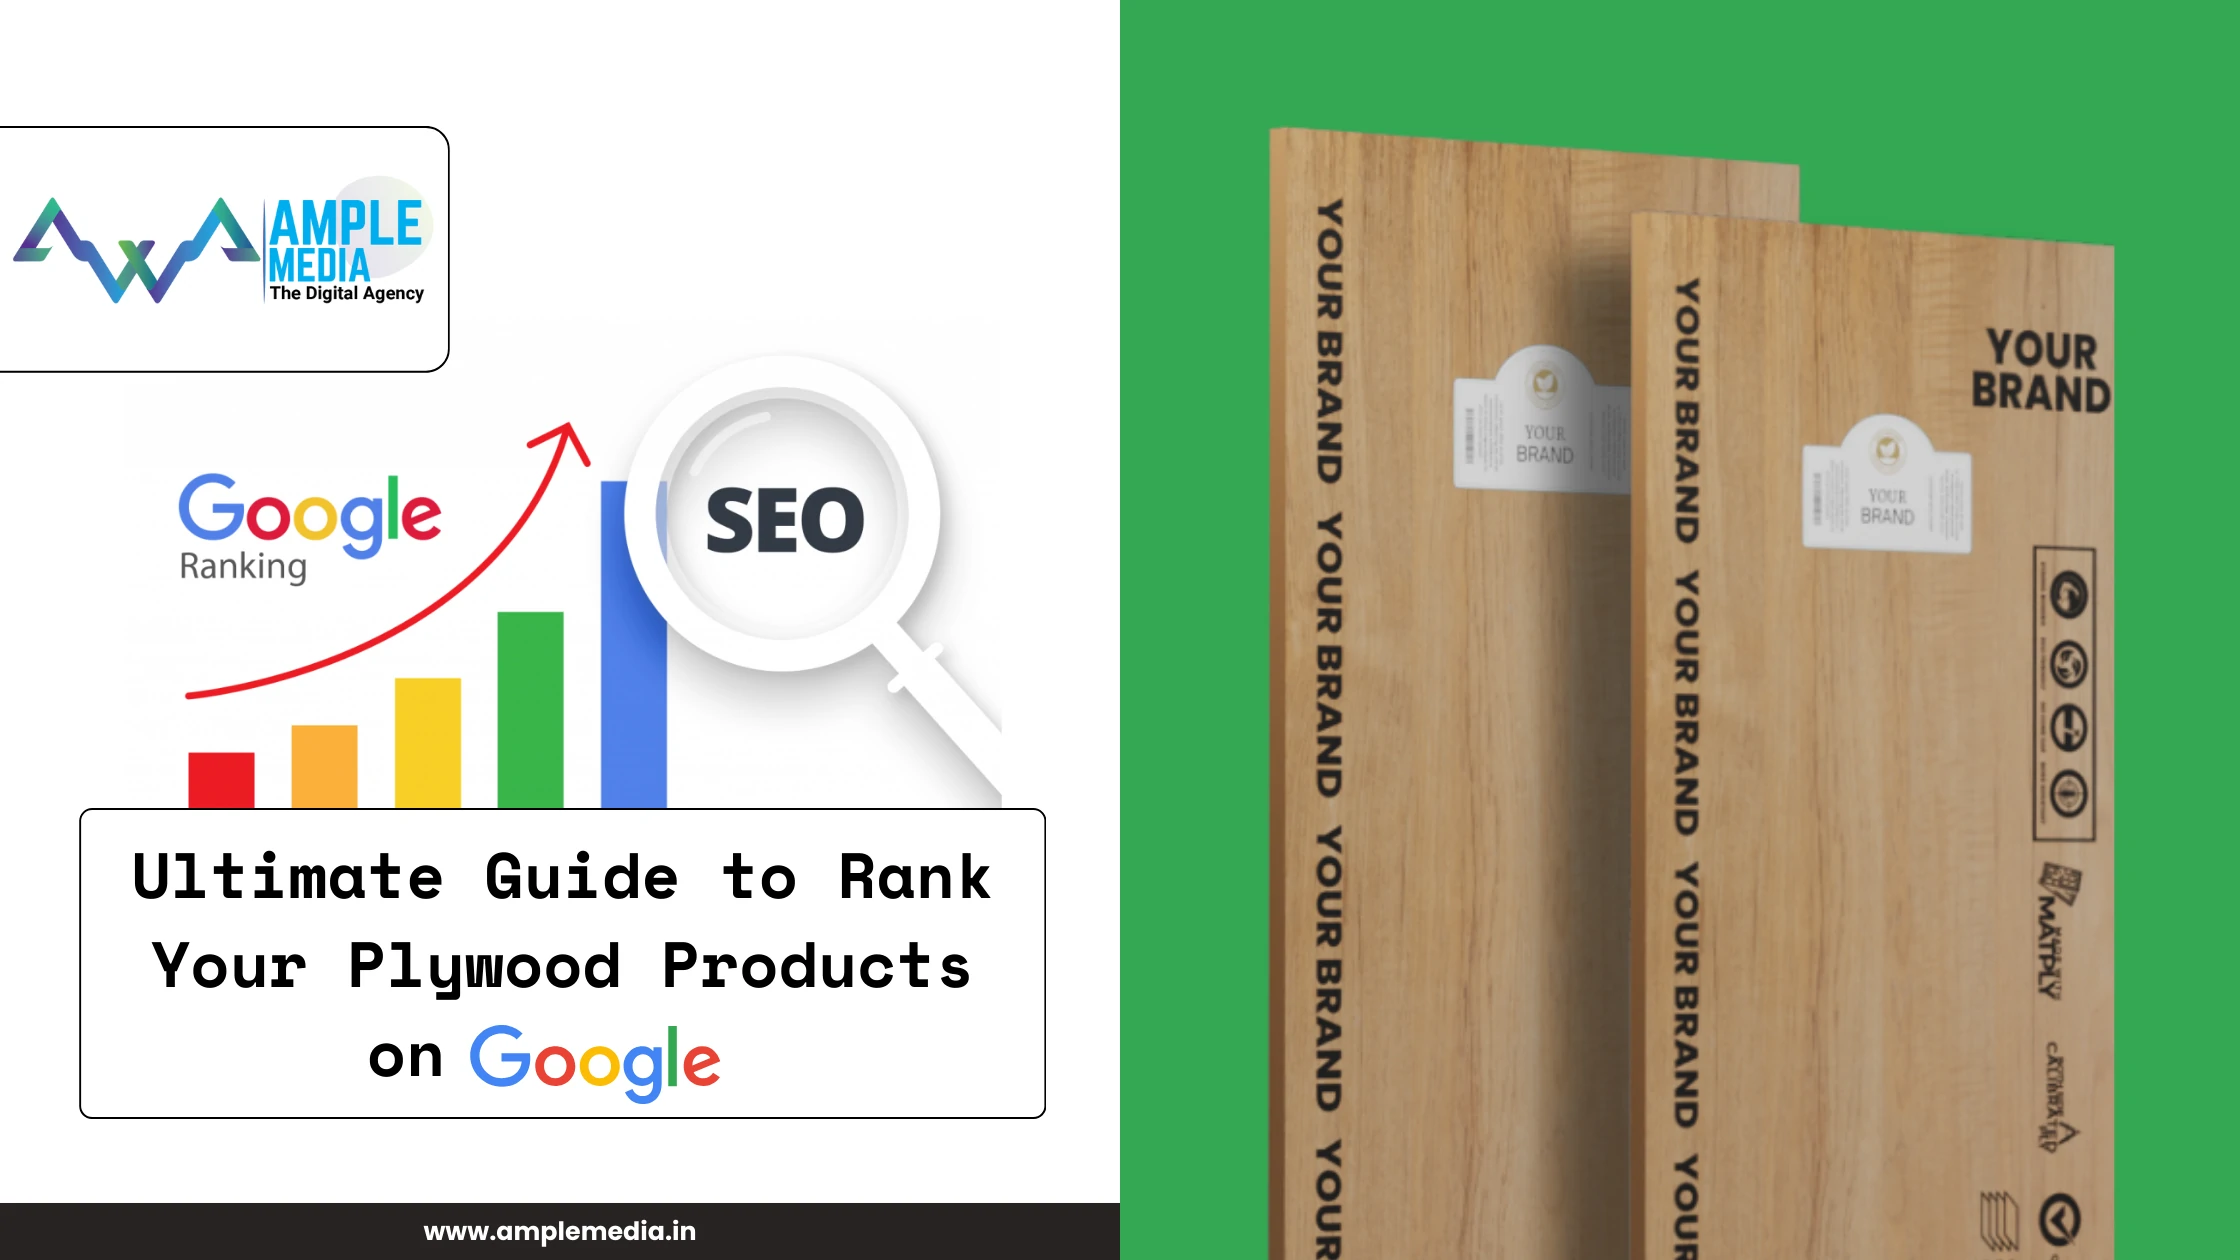 Ultimate Guide to Rank Your Plywood Products on Google